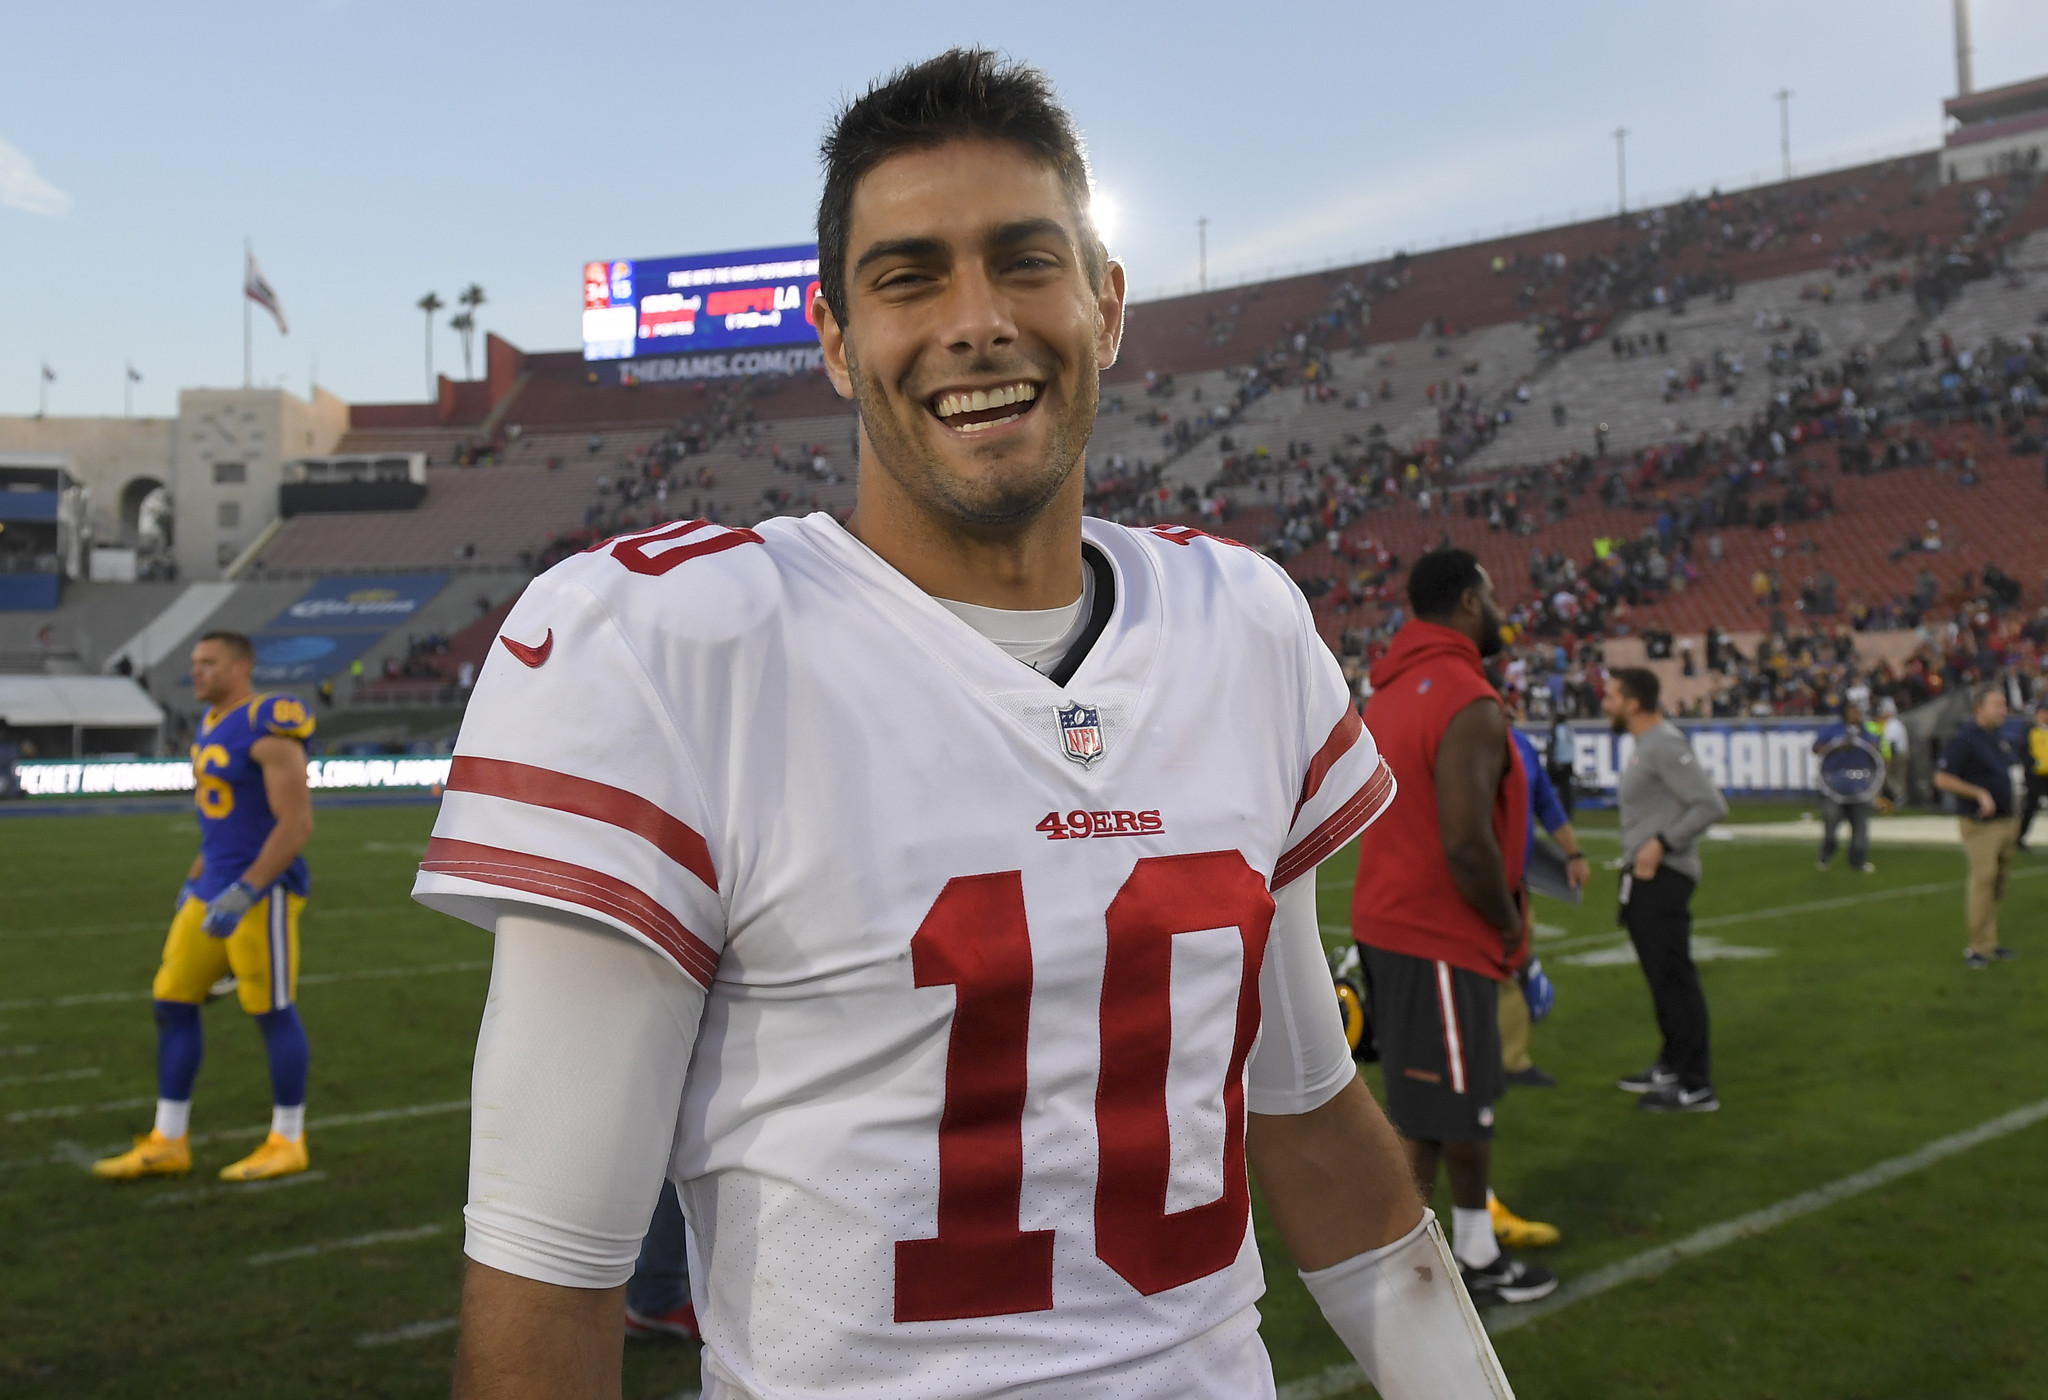 49ers re-sign QB Jimmy Garoppolo to 5-year deal worth $137.5 million - Chicago Tribune